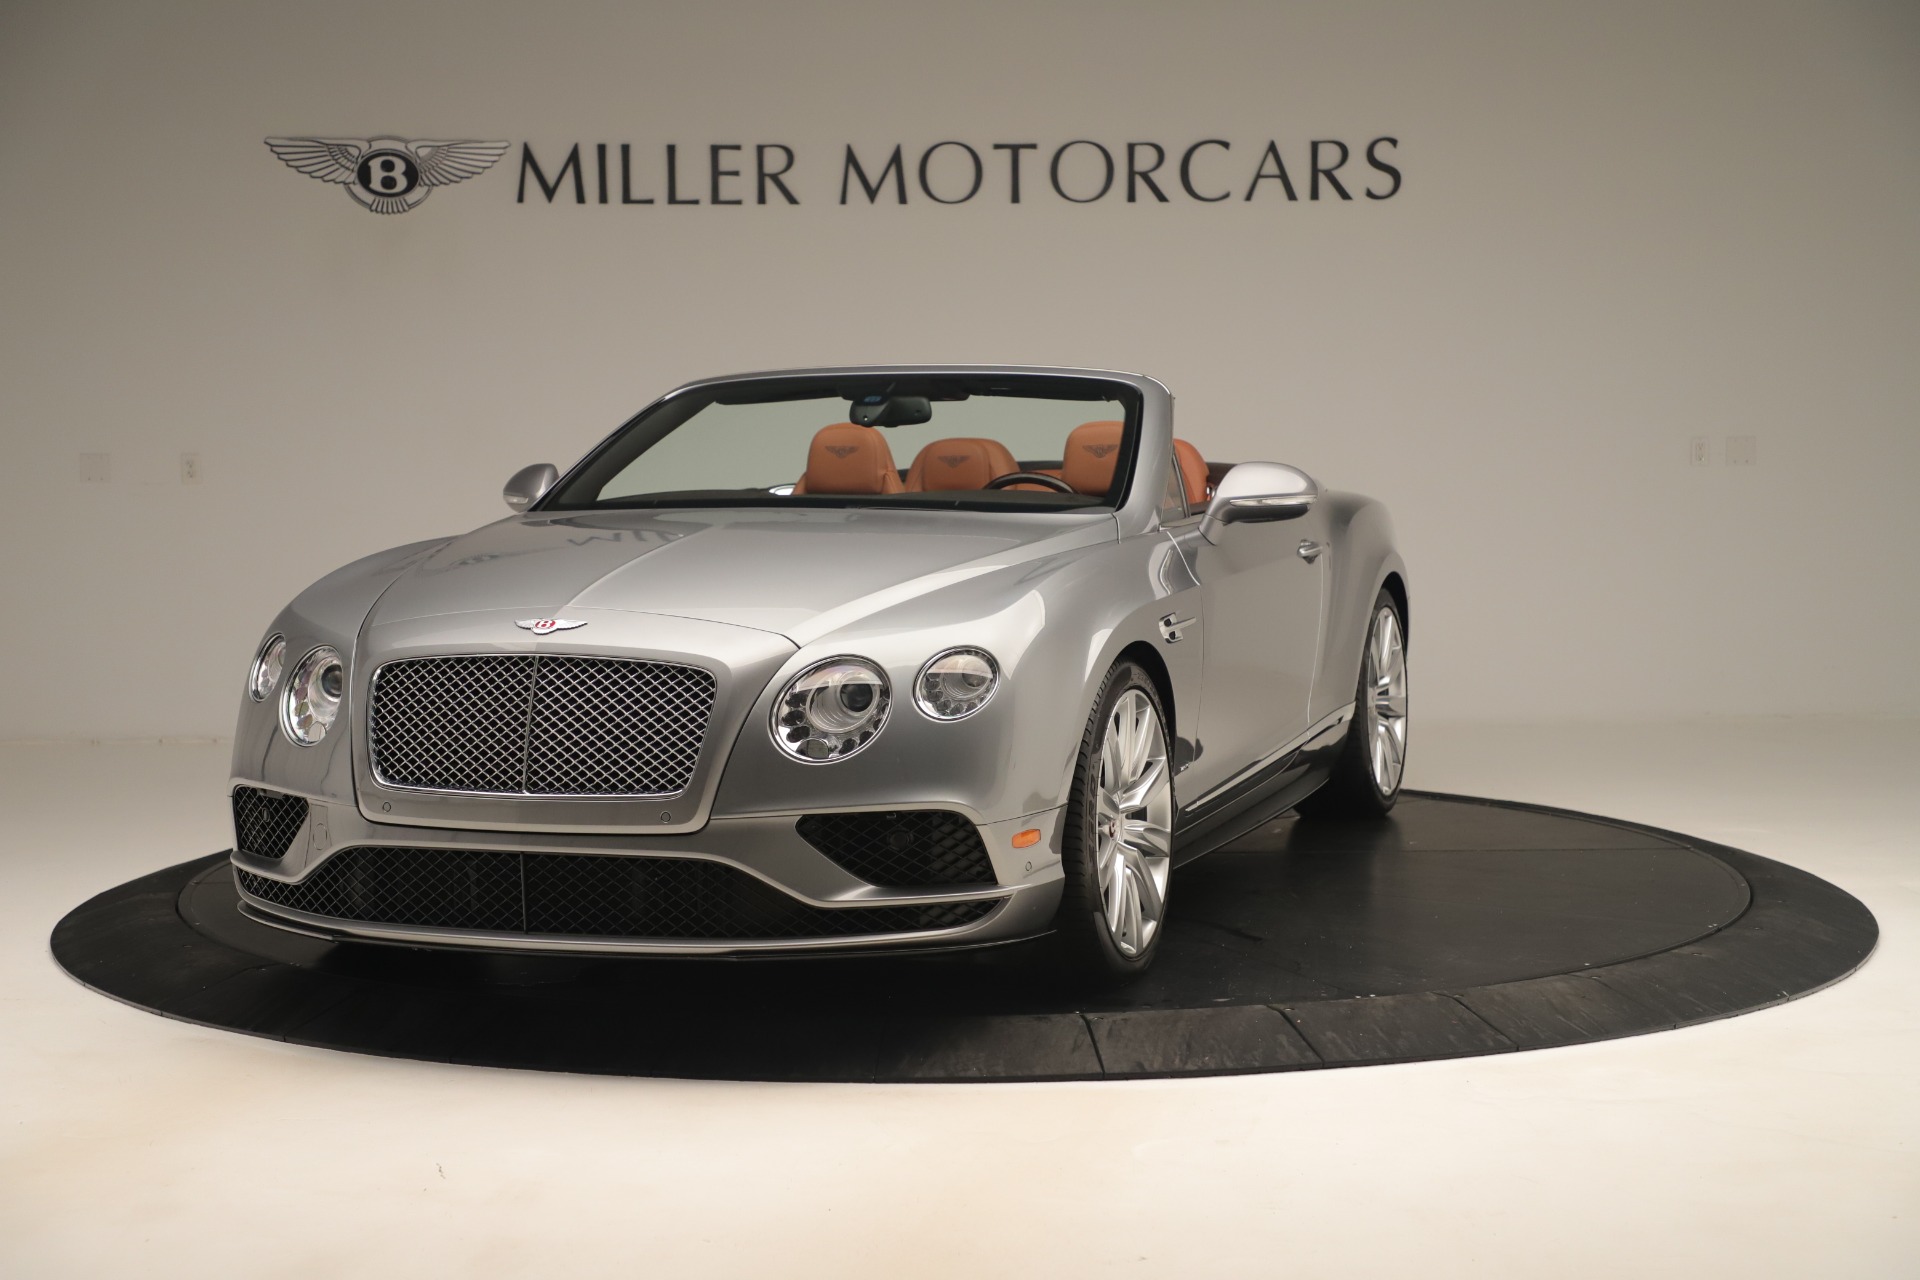 Used 2016 Bentley Continental GT V8 S for sale Sold at Alfa Romeo of Greenwich in Greenwich CT 06830 1